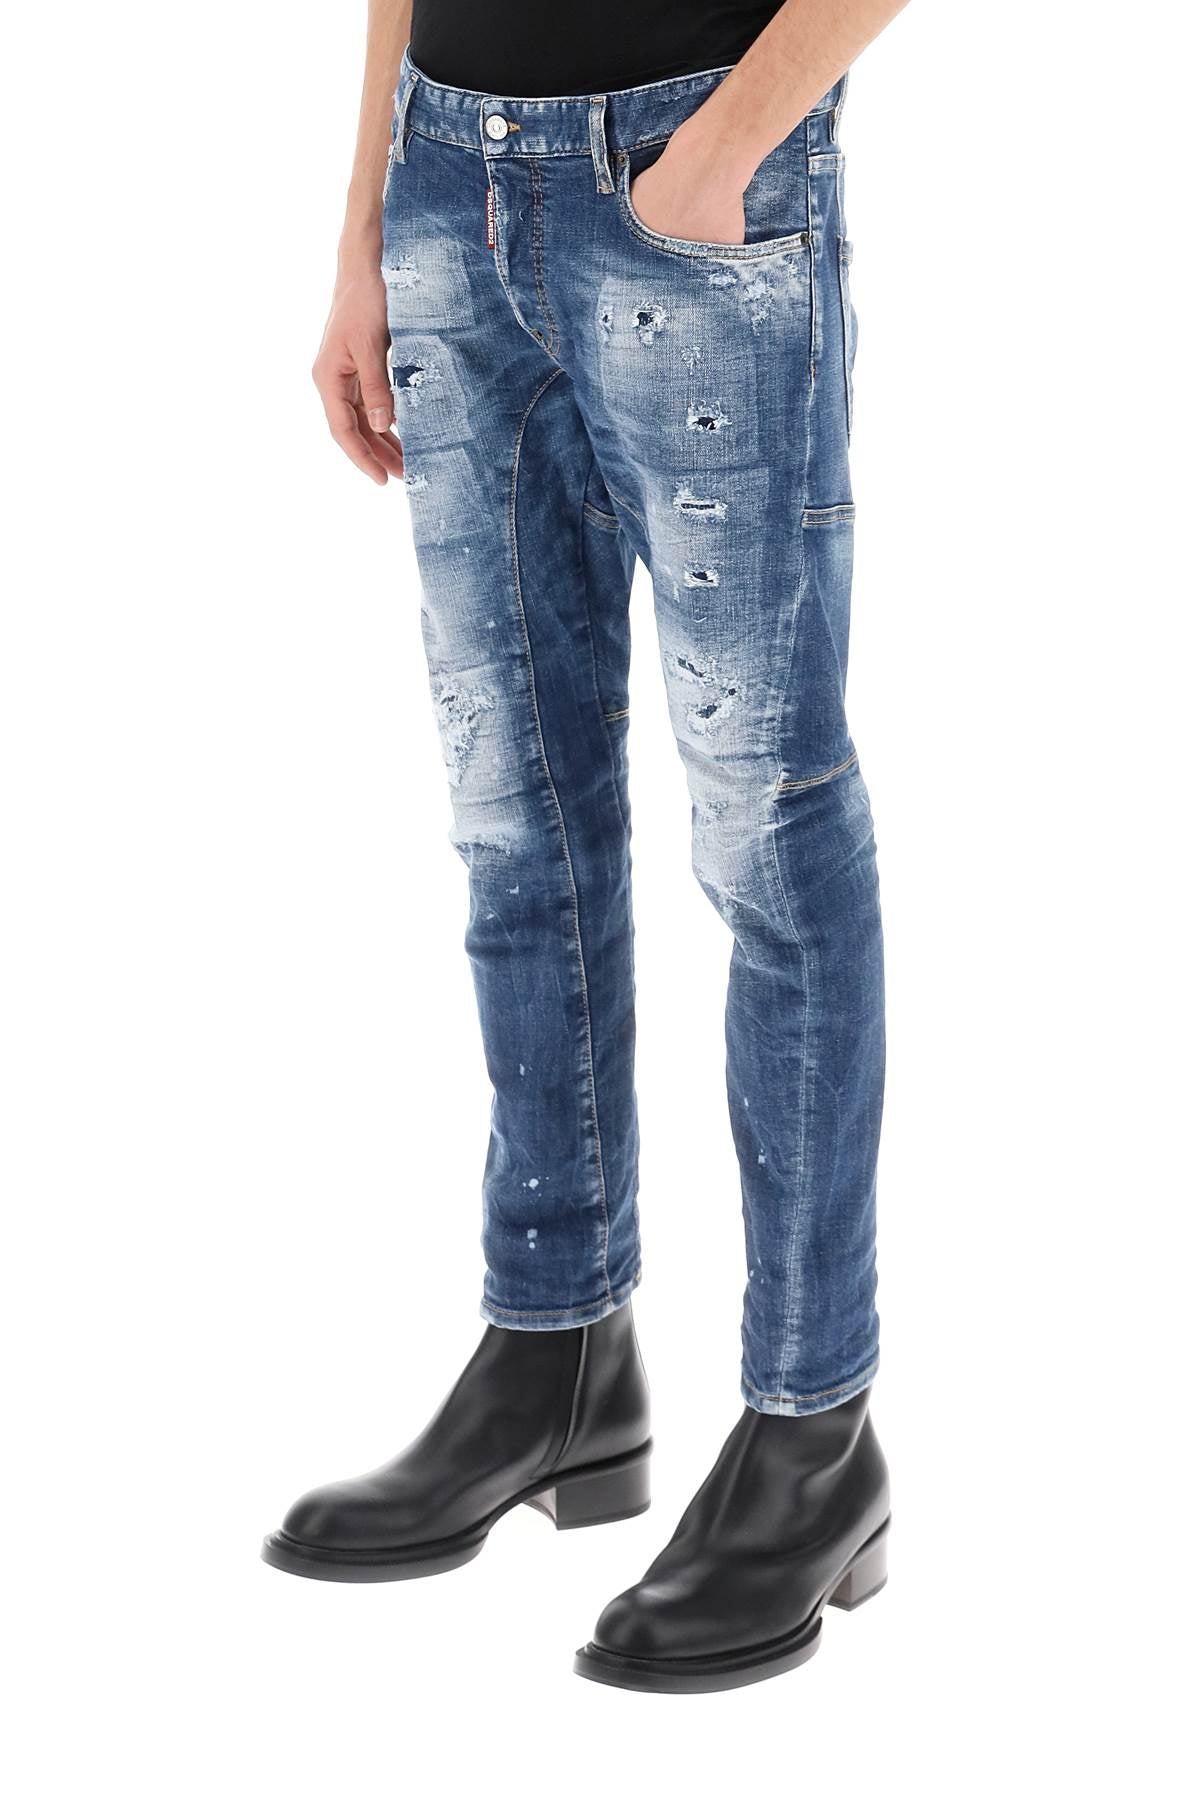 Dsquared2 medium mended rips wash tidy biker jeans-3